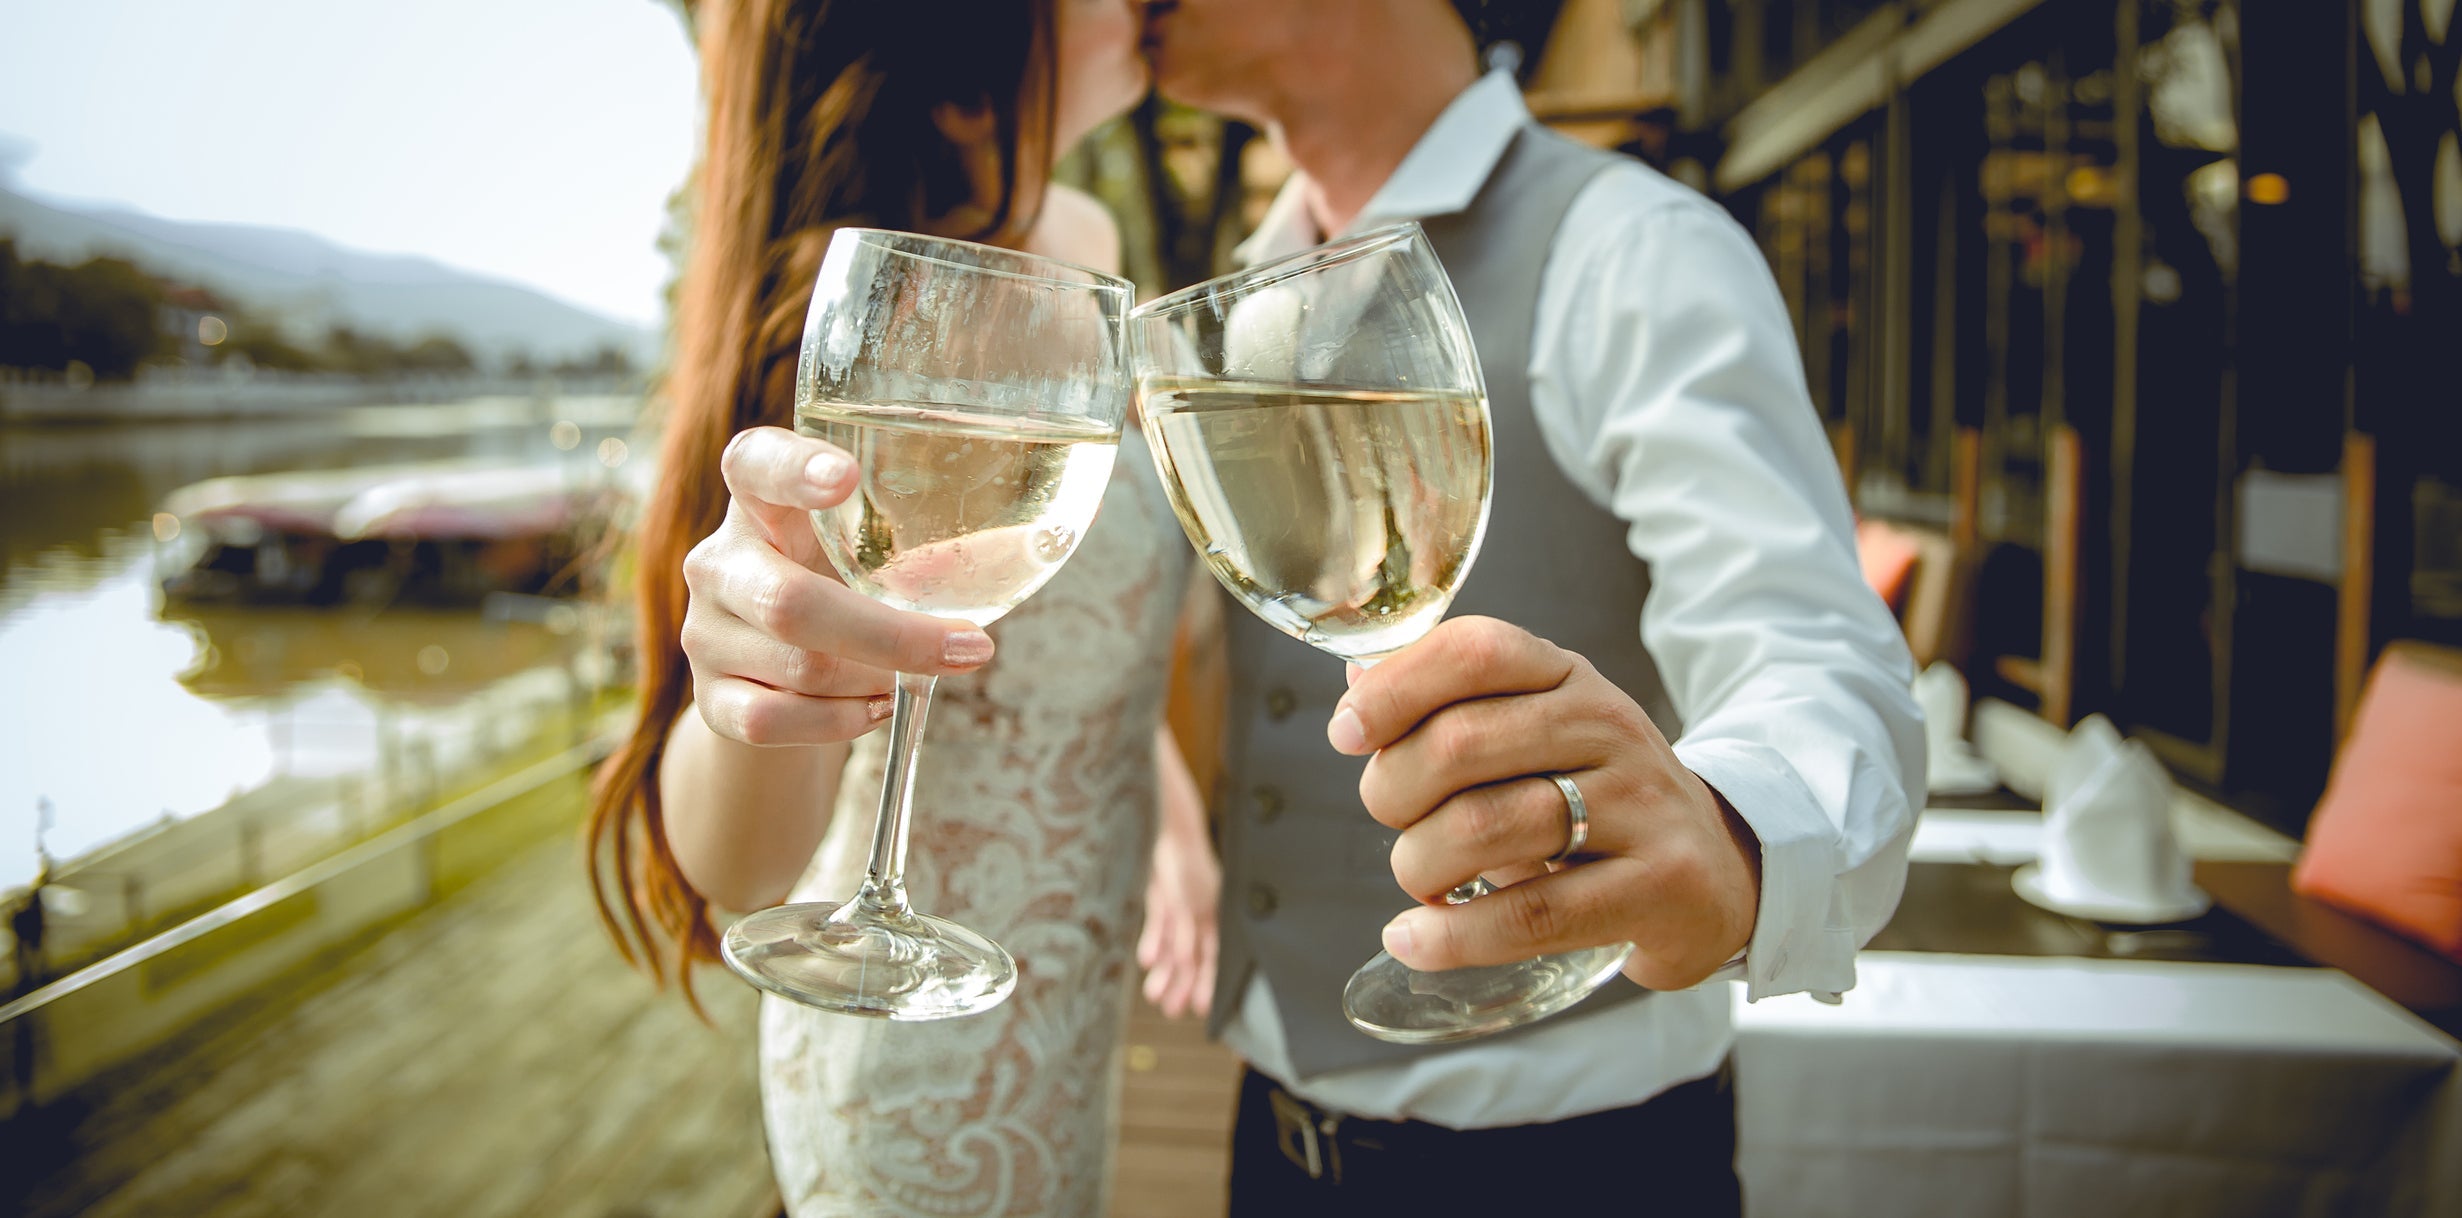 What Wine Should You Serve at Your Themed Wedding?